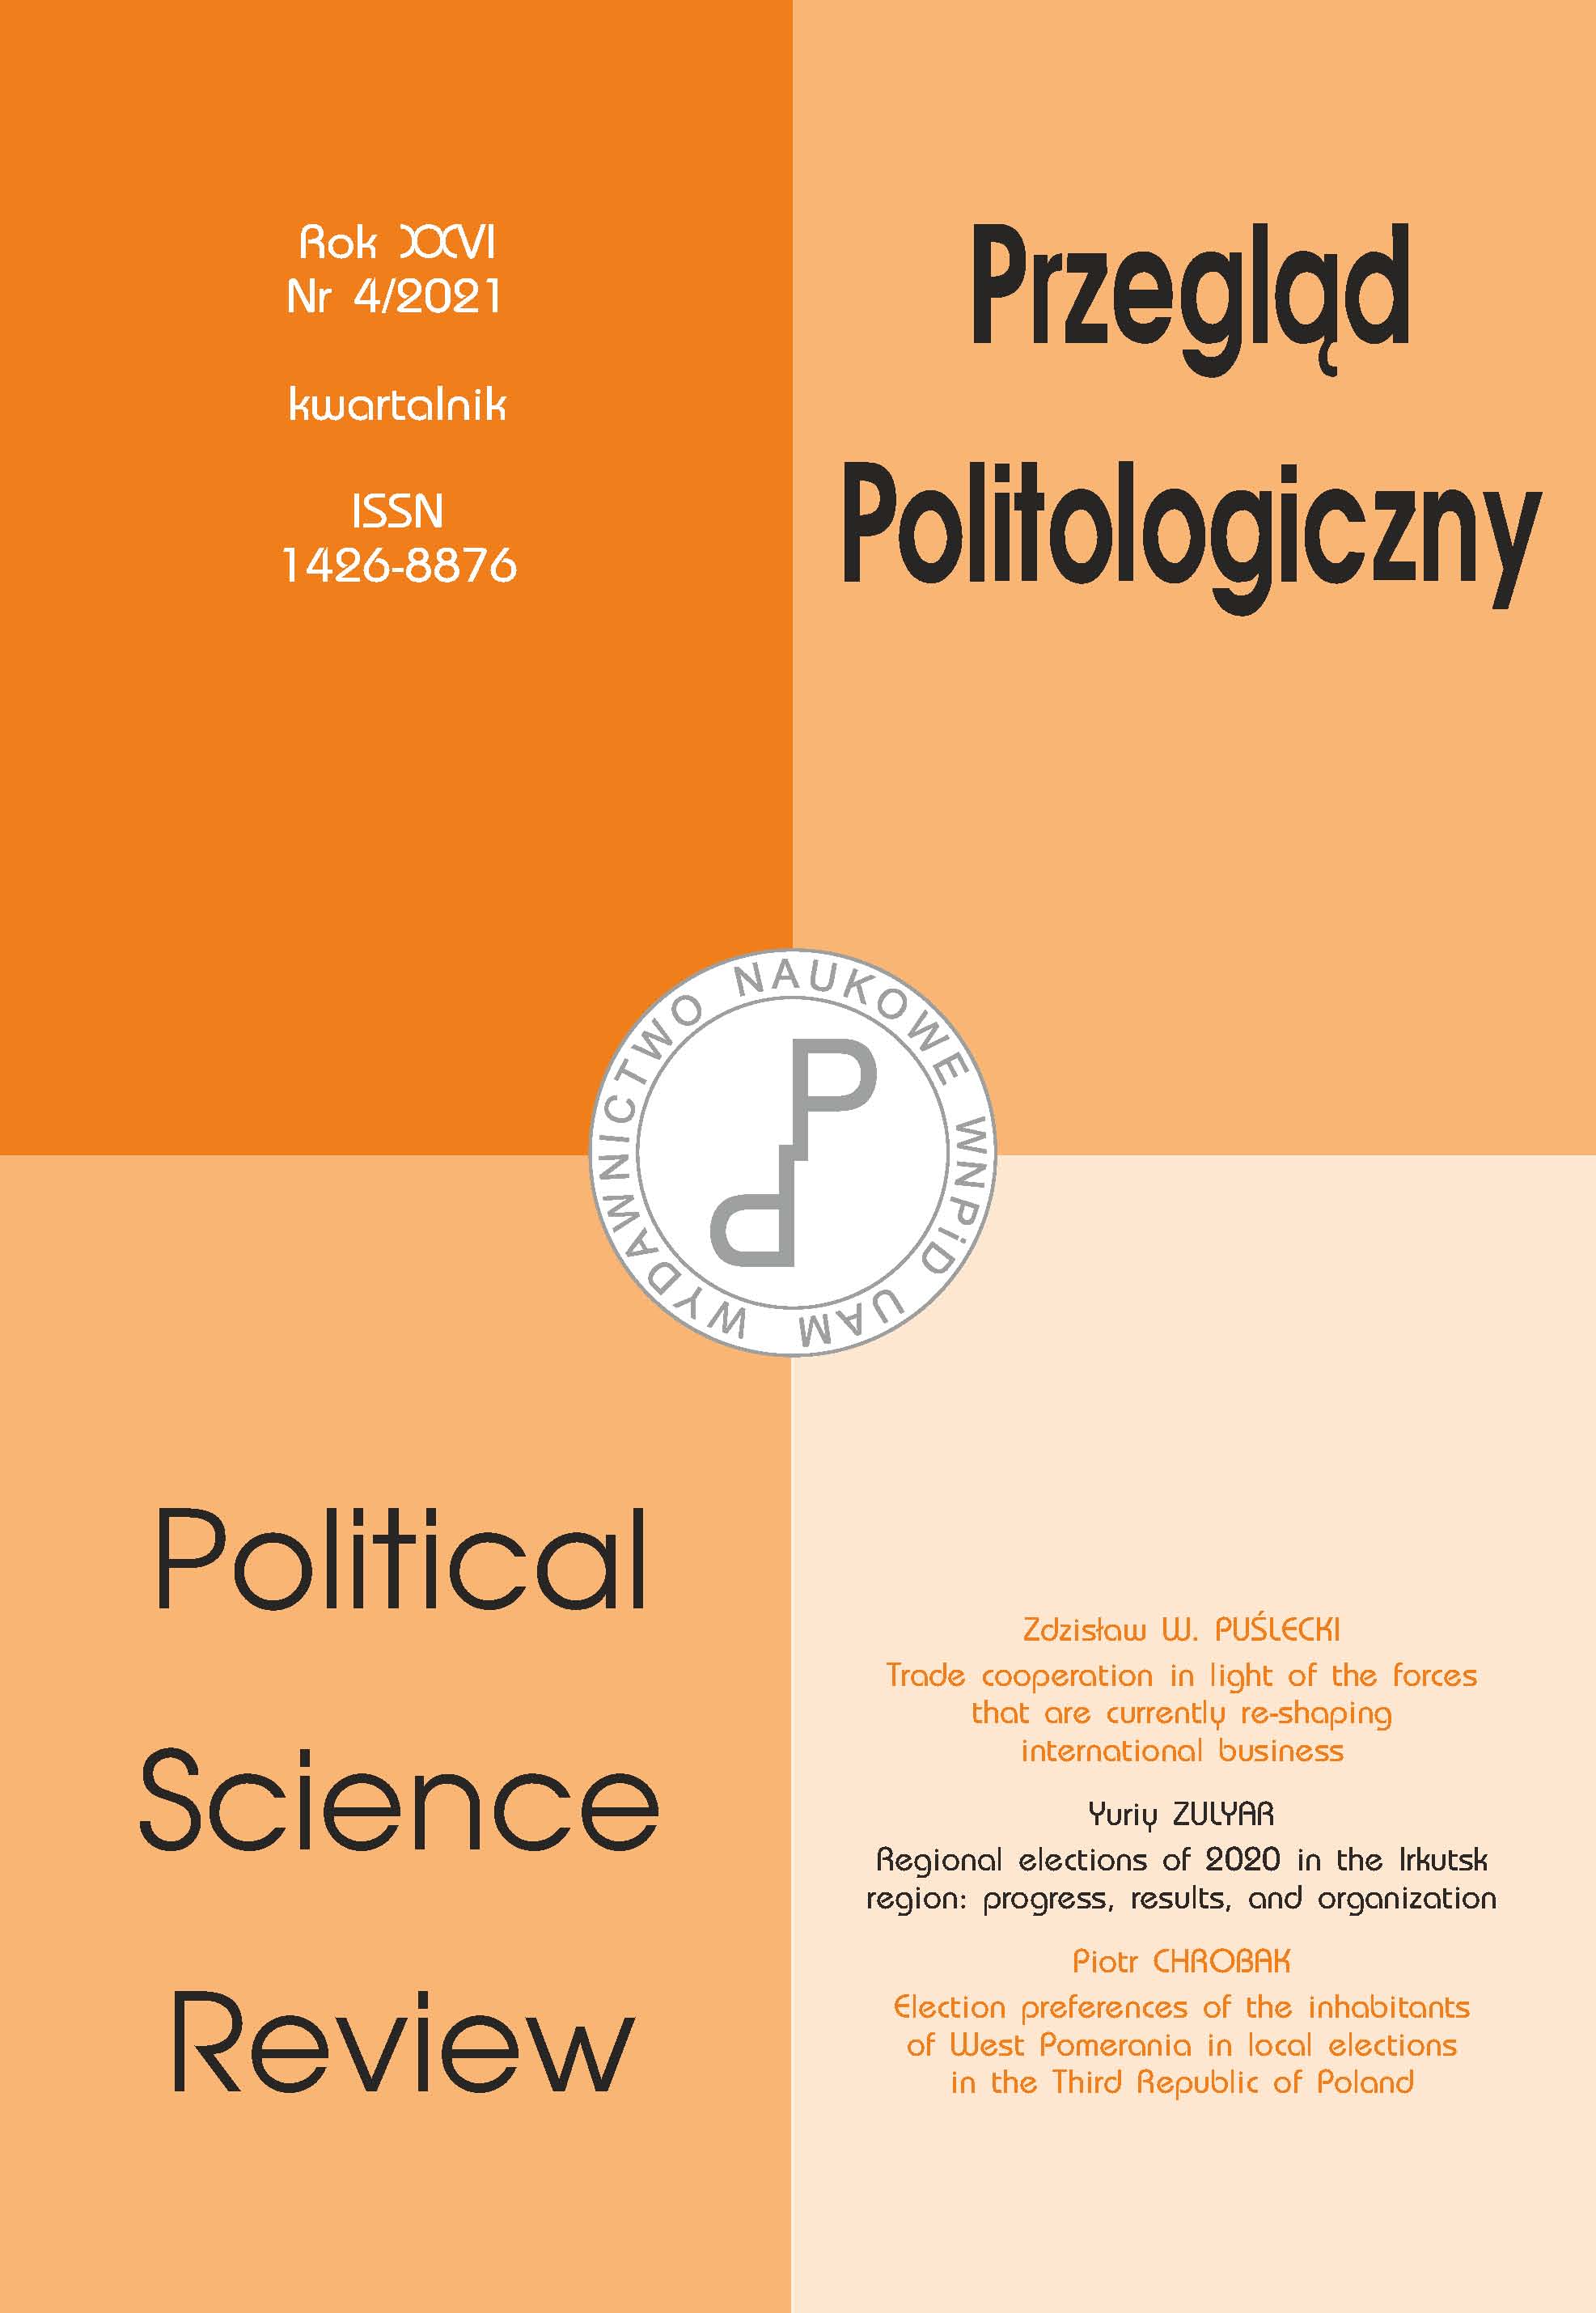 Election preferences of the inhabitants of West Pomerania in local elections in the Third Republic of Poland